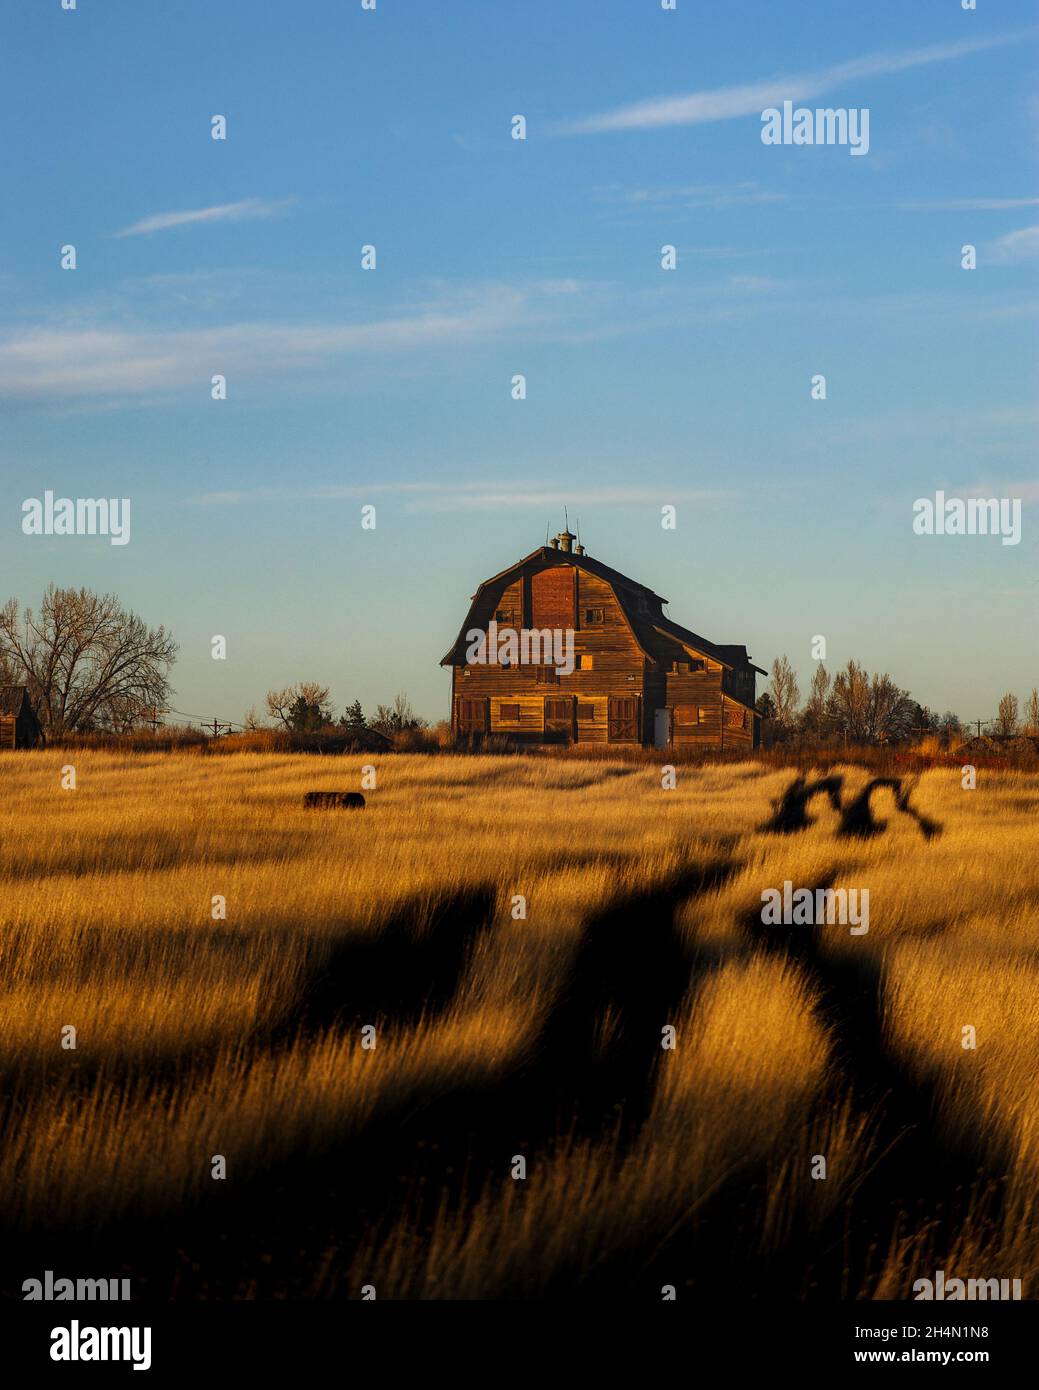 A rustic barn sits in a field of wheat Stock Photo